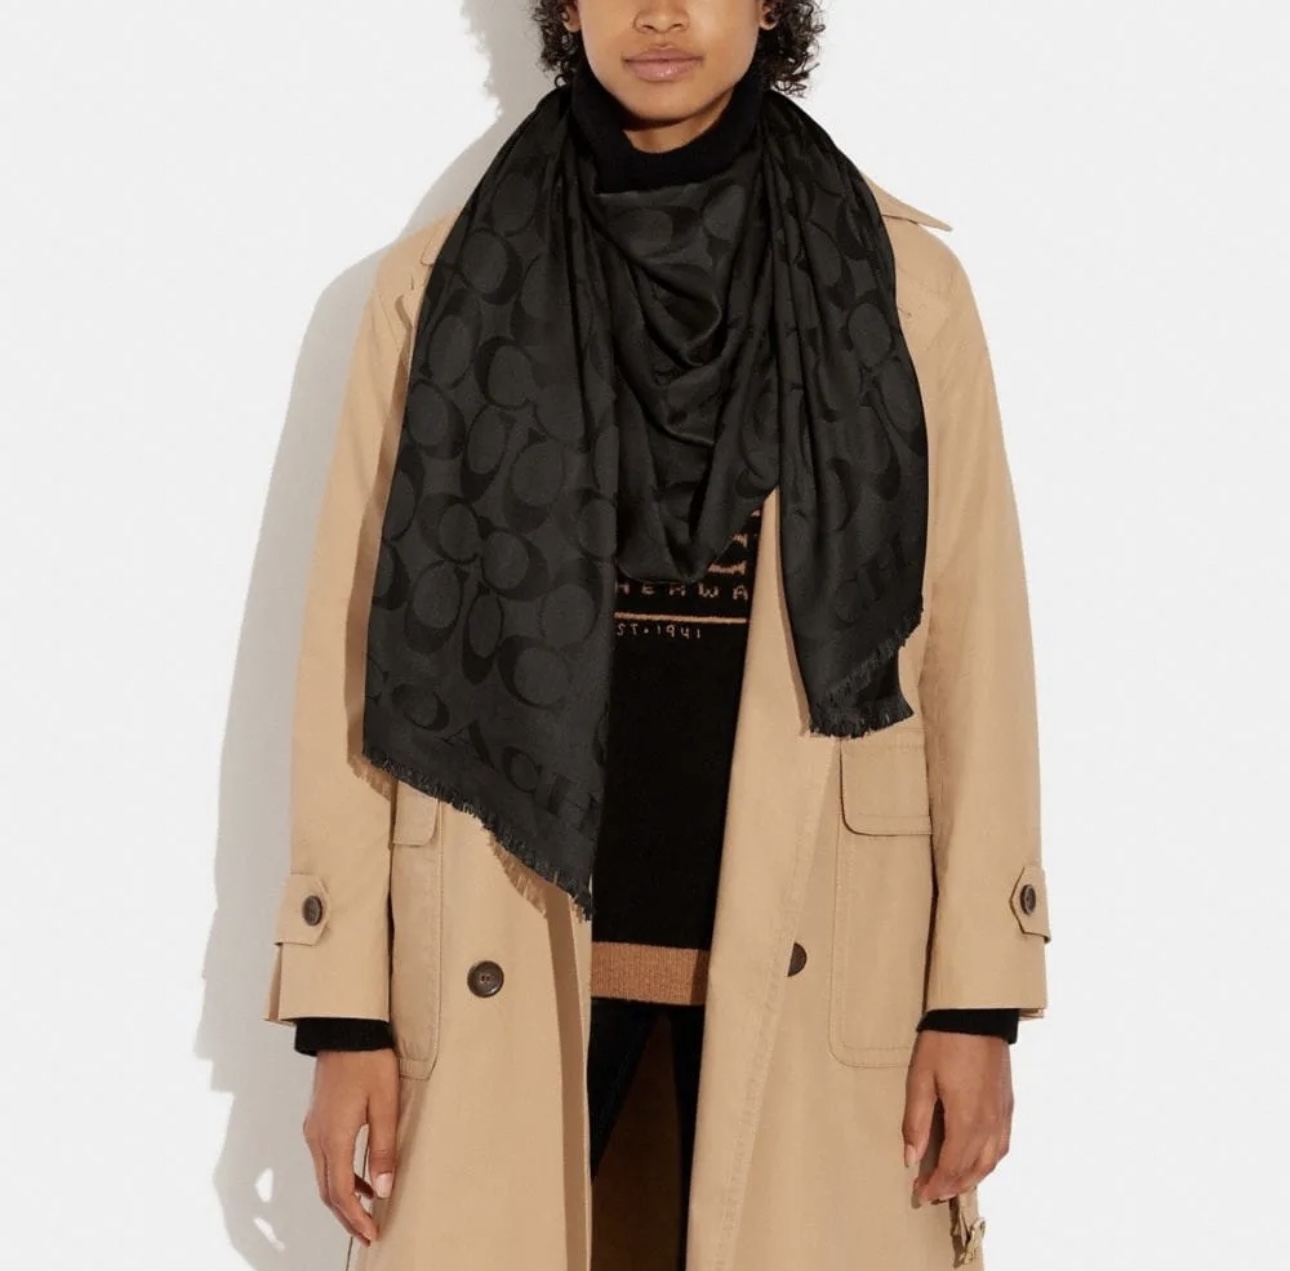 A person wearing a black Coach scarf and a beige trench coat